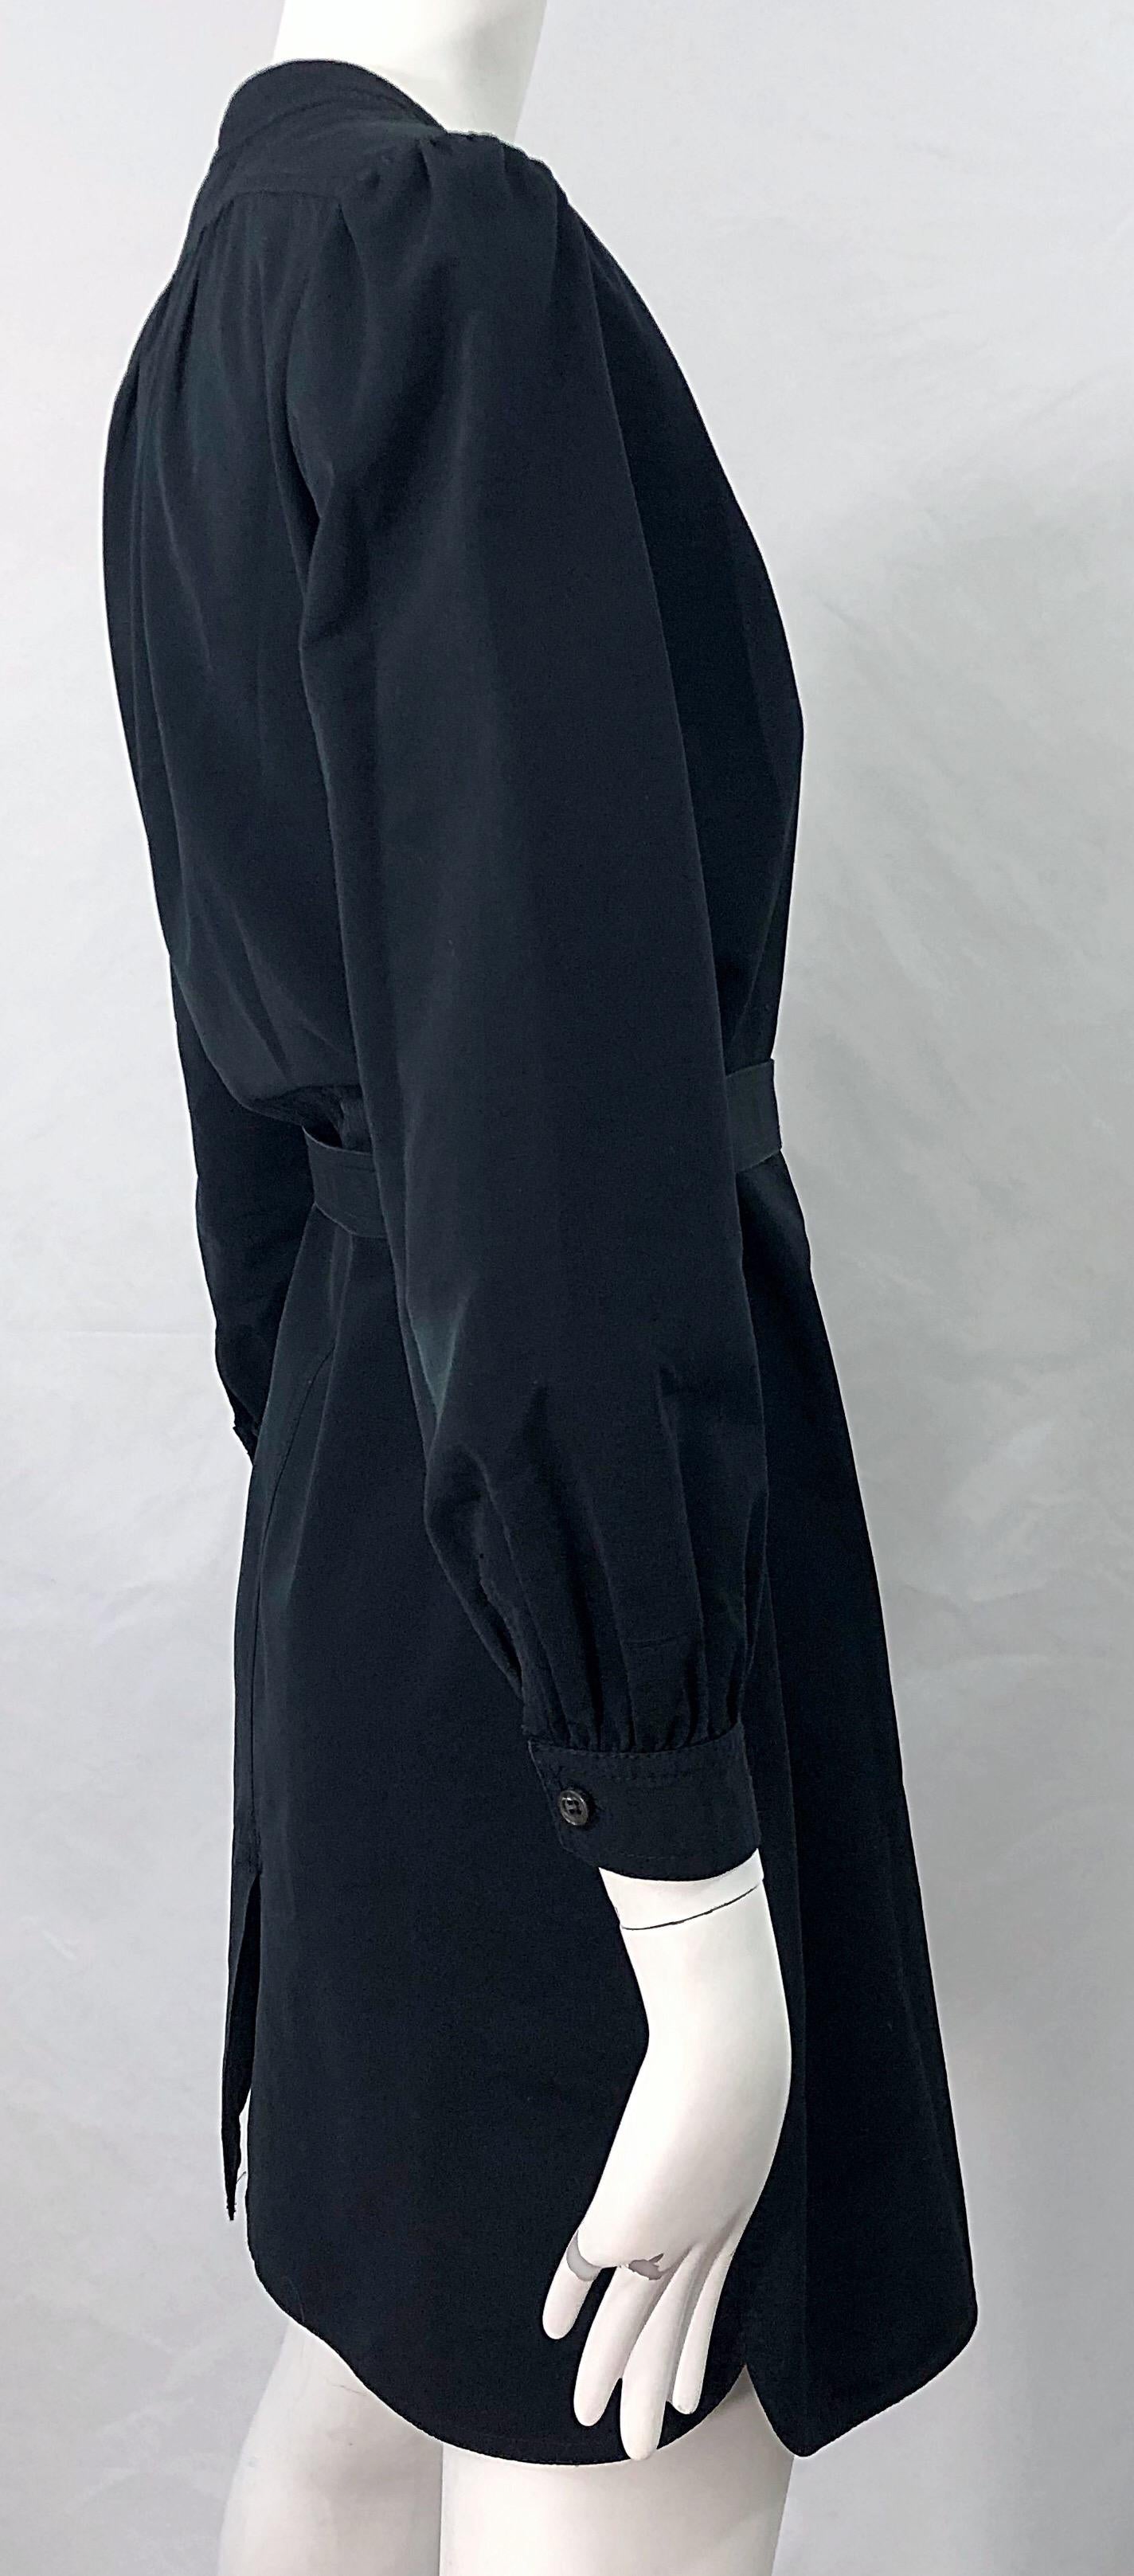 Derek Lam Early 2000s Size 6 / 8 Black Silk Rayon Belted Shirt Dress For Sale 6